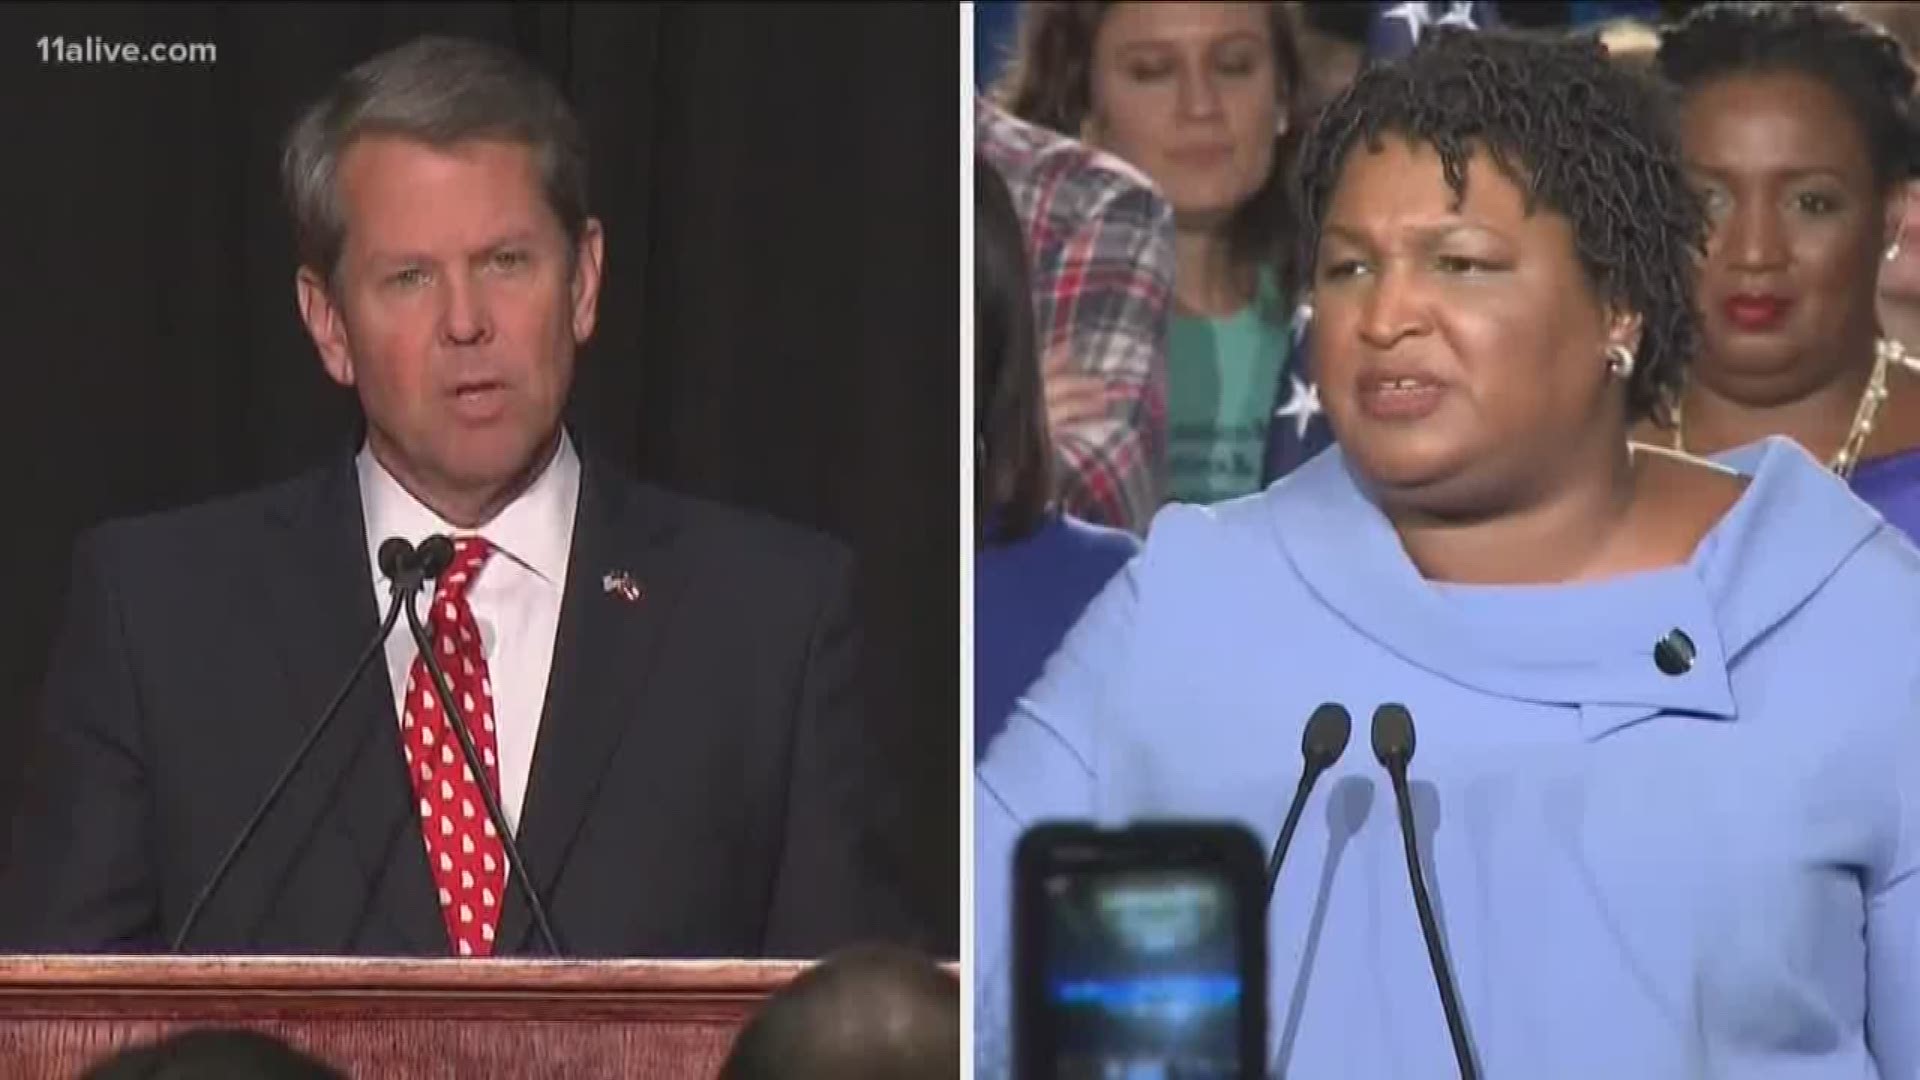 Five Georgia voters are hopeful that an emergency federal injunction will take Brian Kemp out of the role of overseeing the election process.